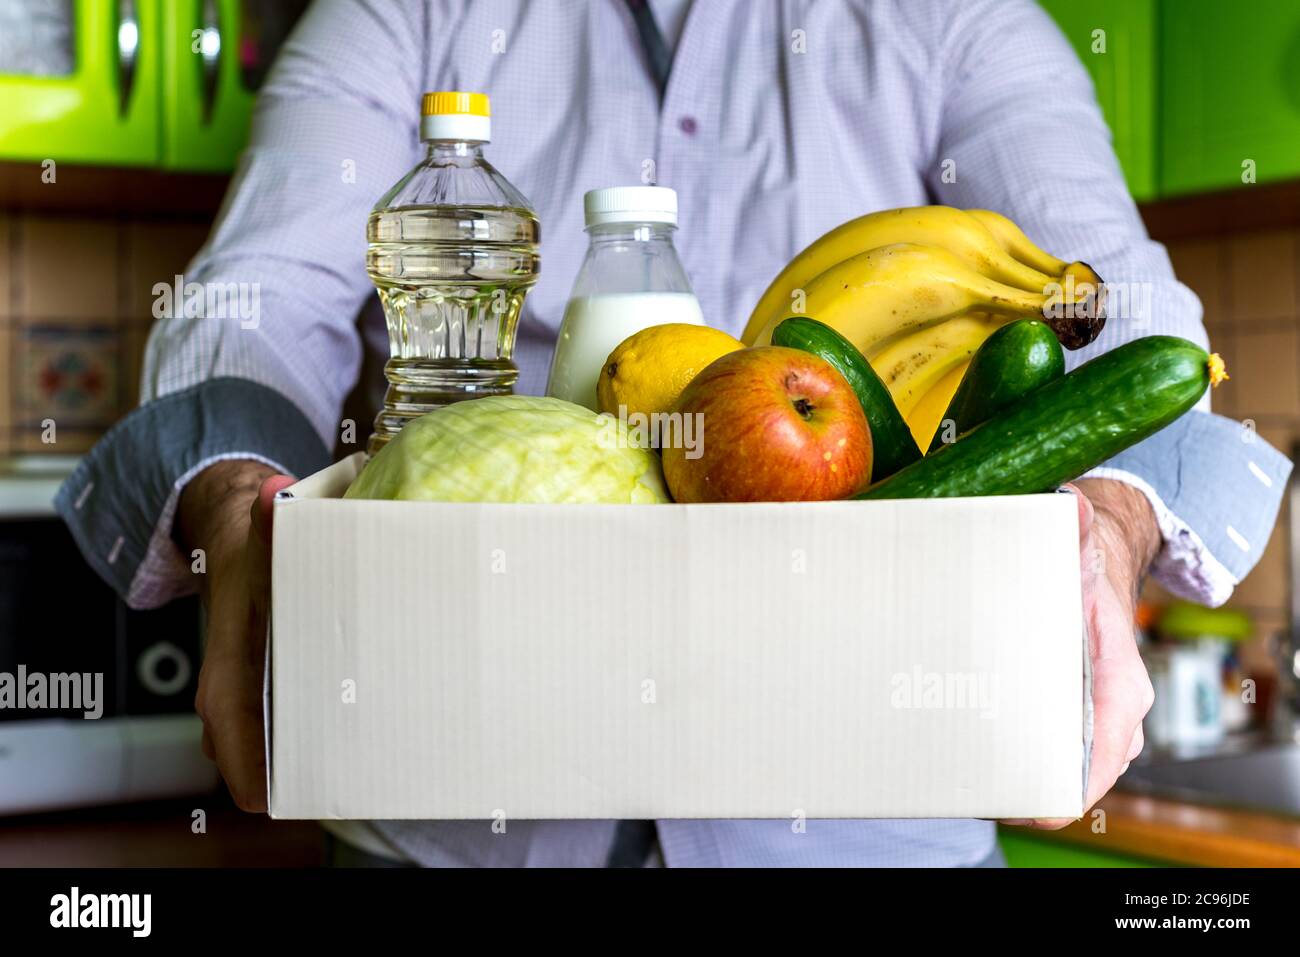 Donation box food delivery Food donation concept. A man holding a donation box with vegetables, fruits and other food for people Stock Photo